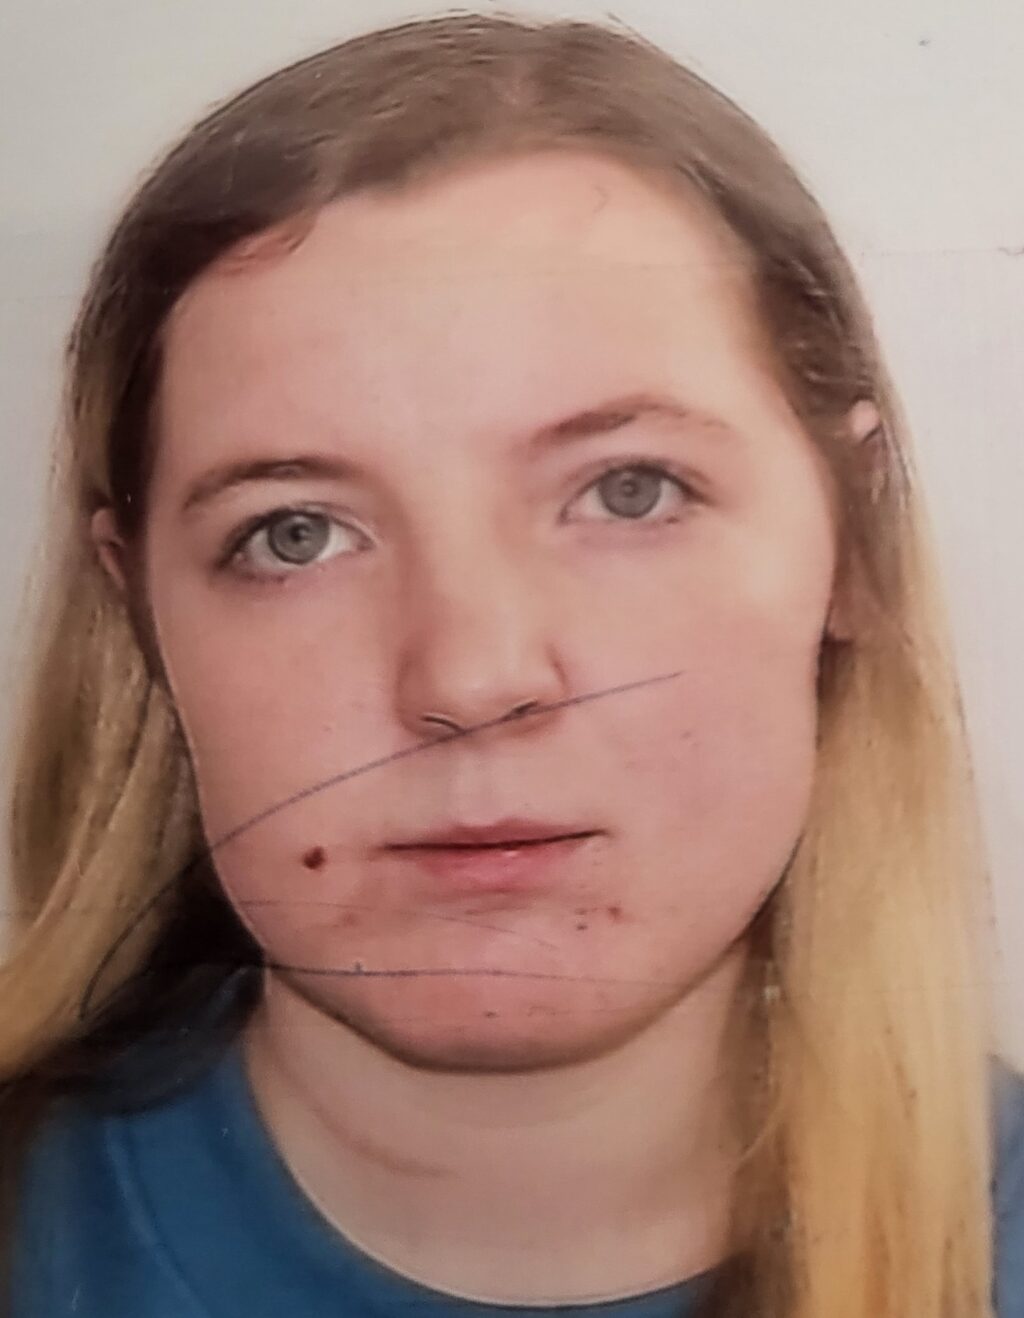 Gardaí in Donegal seek the public’s help in locating missing 17-year-old girl